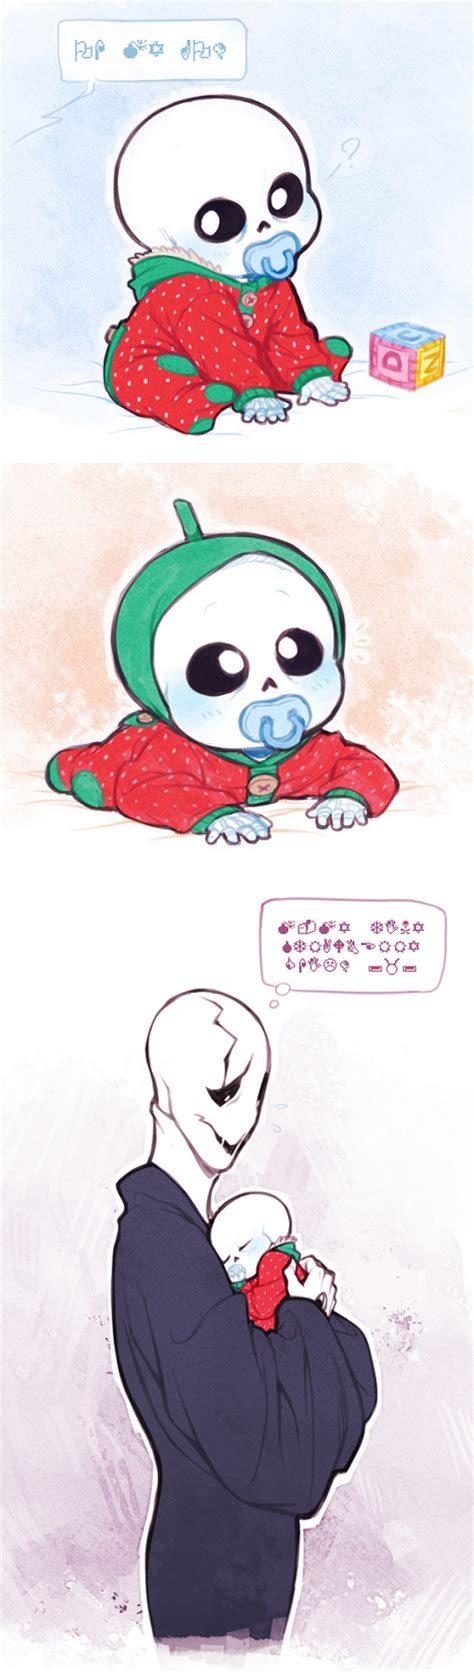 Now Whos The Baby Bones By Frostious Sans Wd Gaster